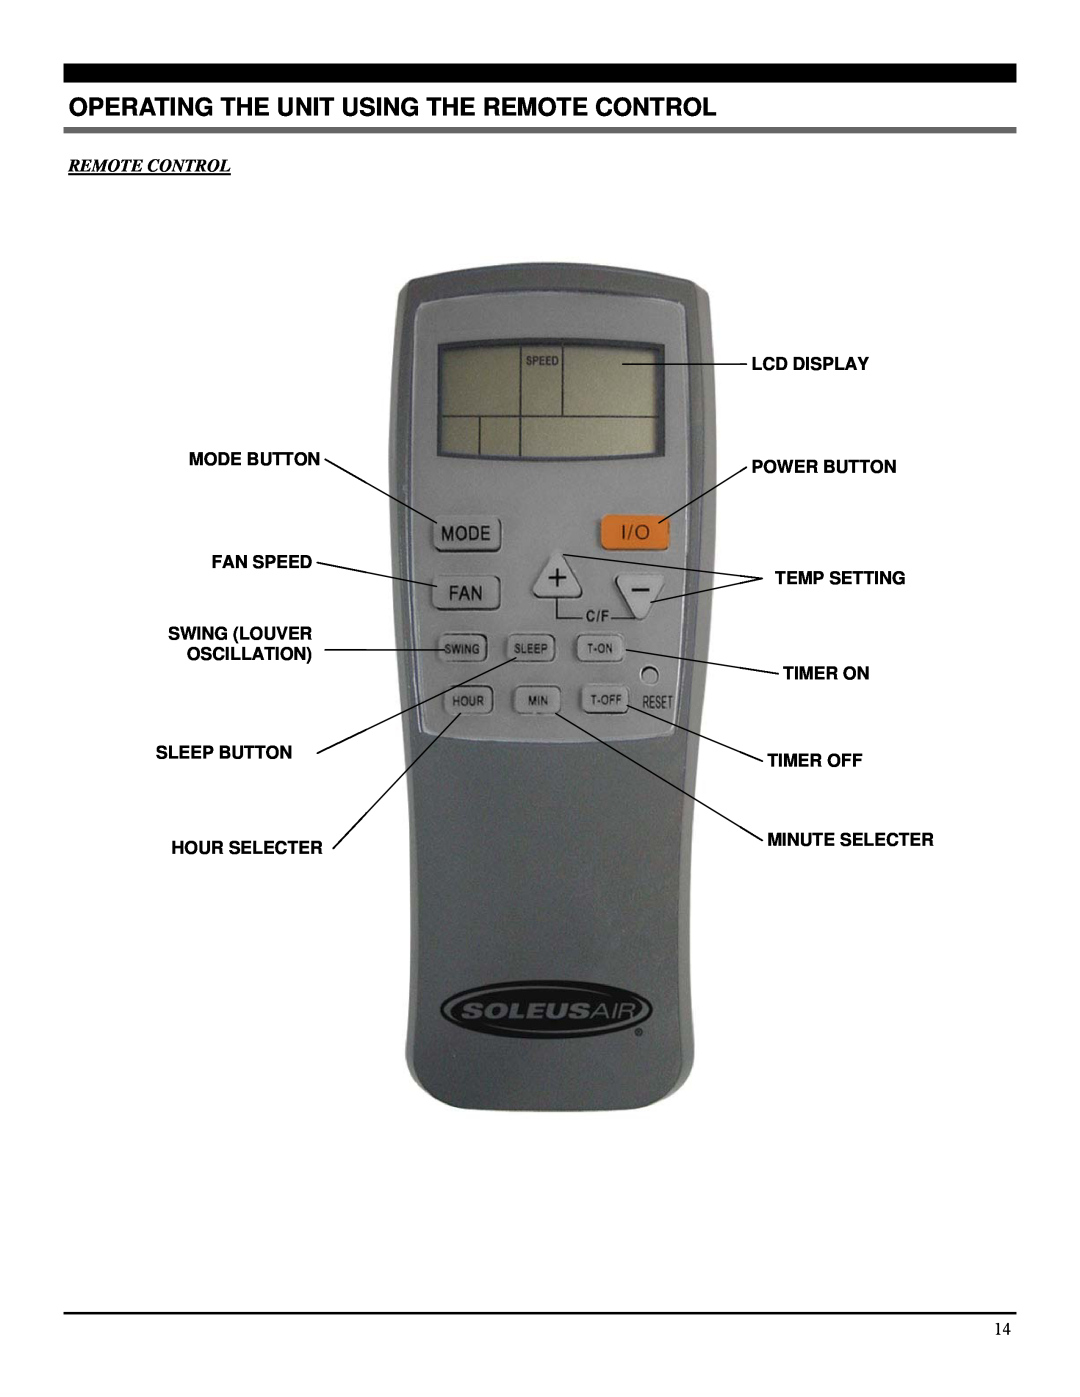 Soleus Air PA1-12R-32 manual Operating The Unit Using The Remote Control, Mode Button Fan Speed Swing Louver Oscillation 